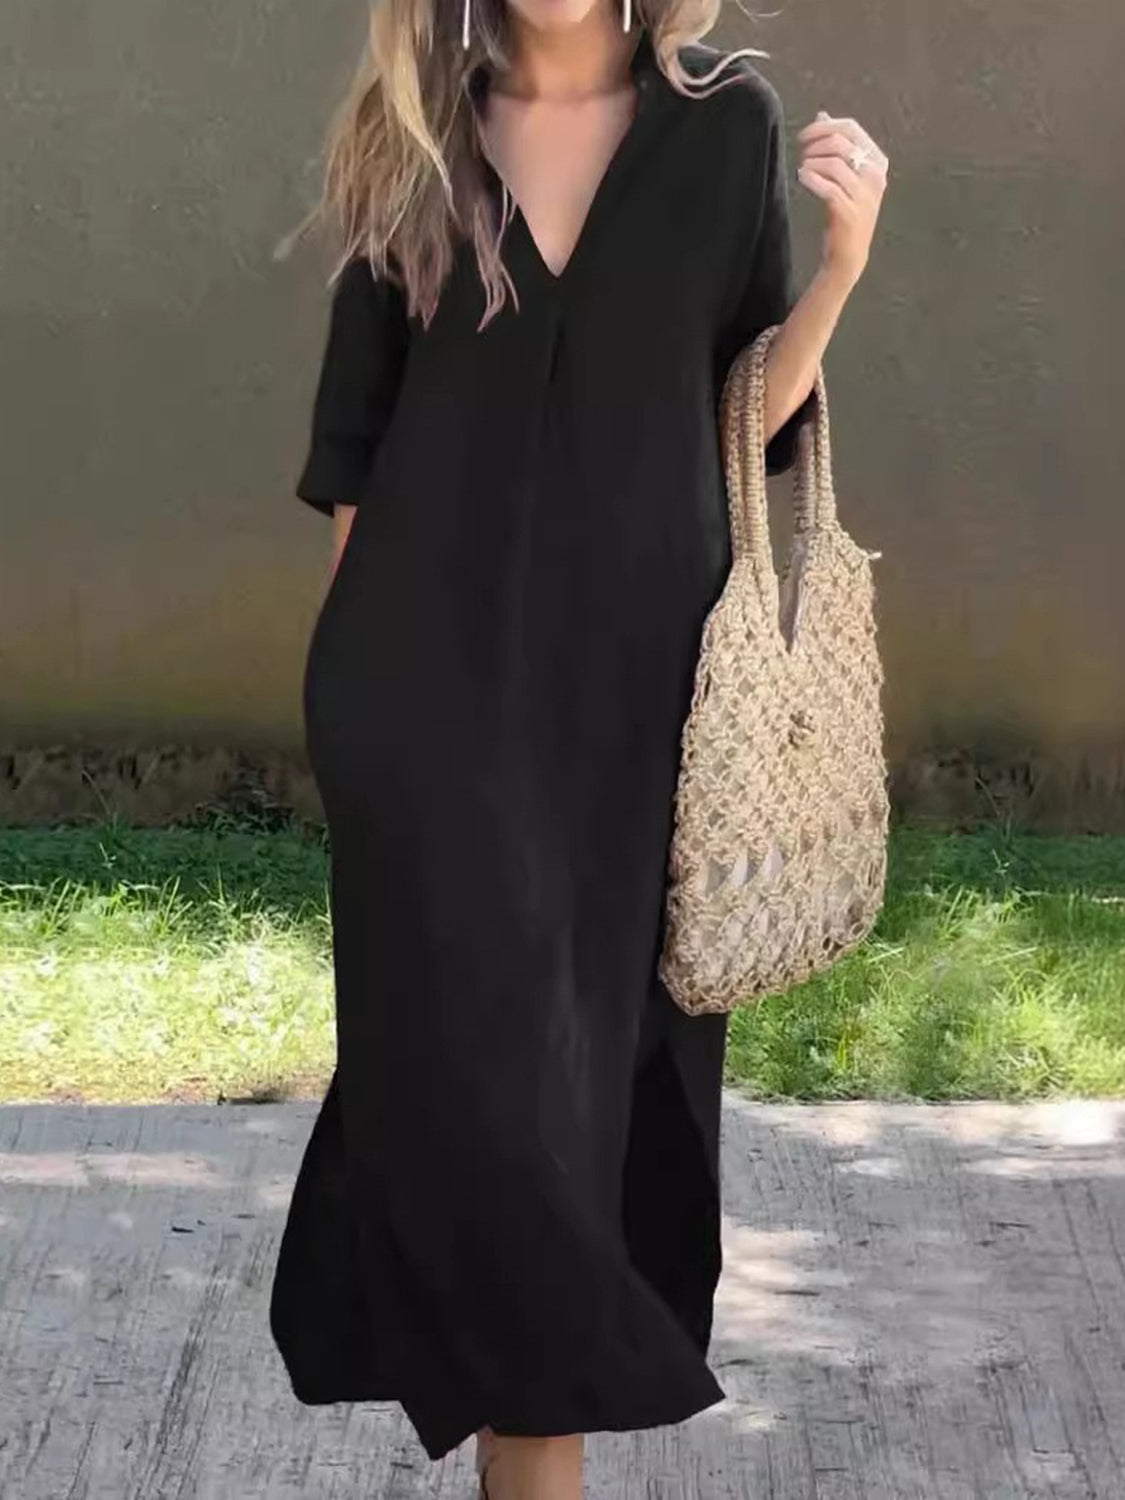 Stylish black maxi dress featuring a V-neck and breathable fabric.